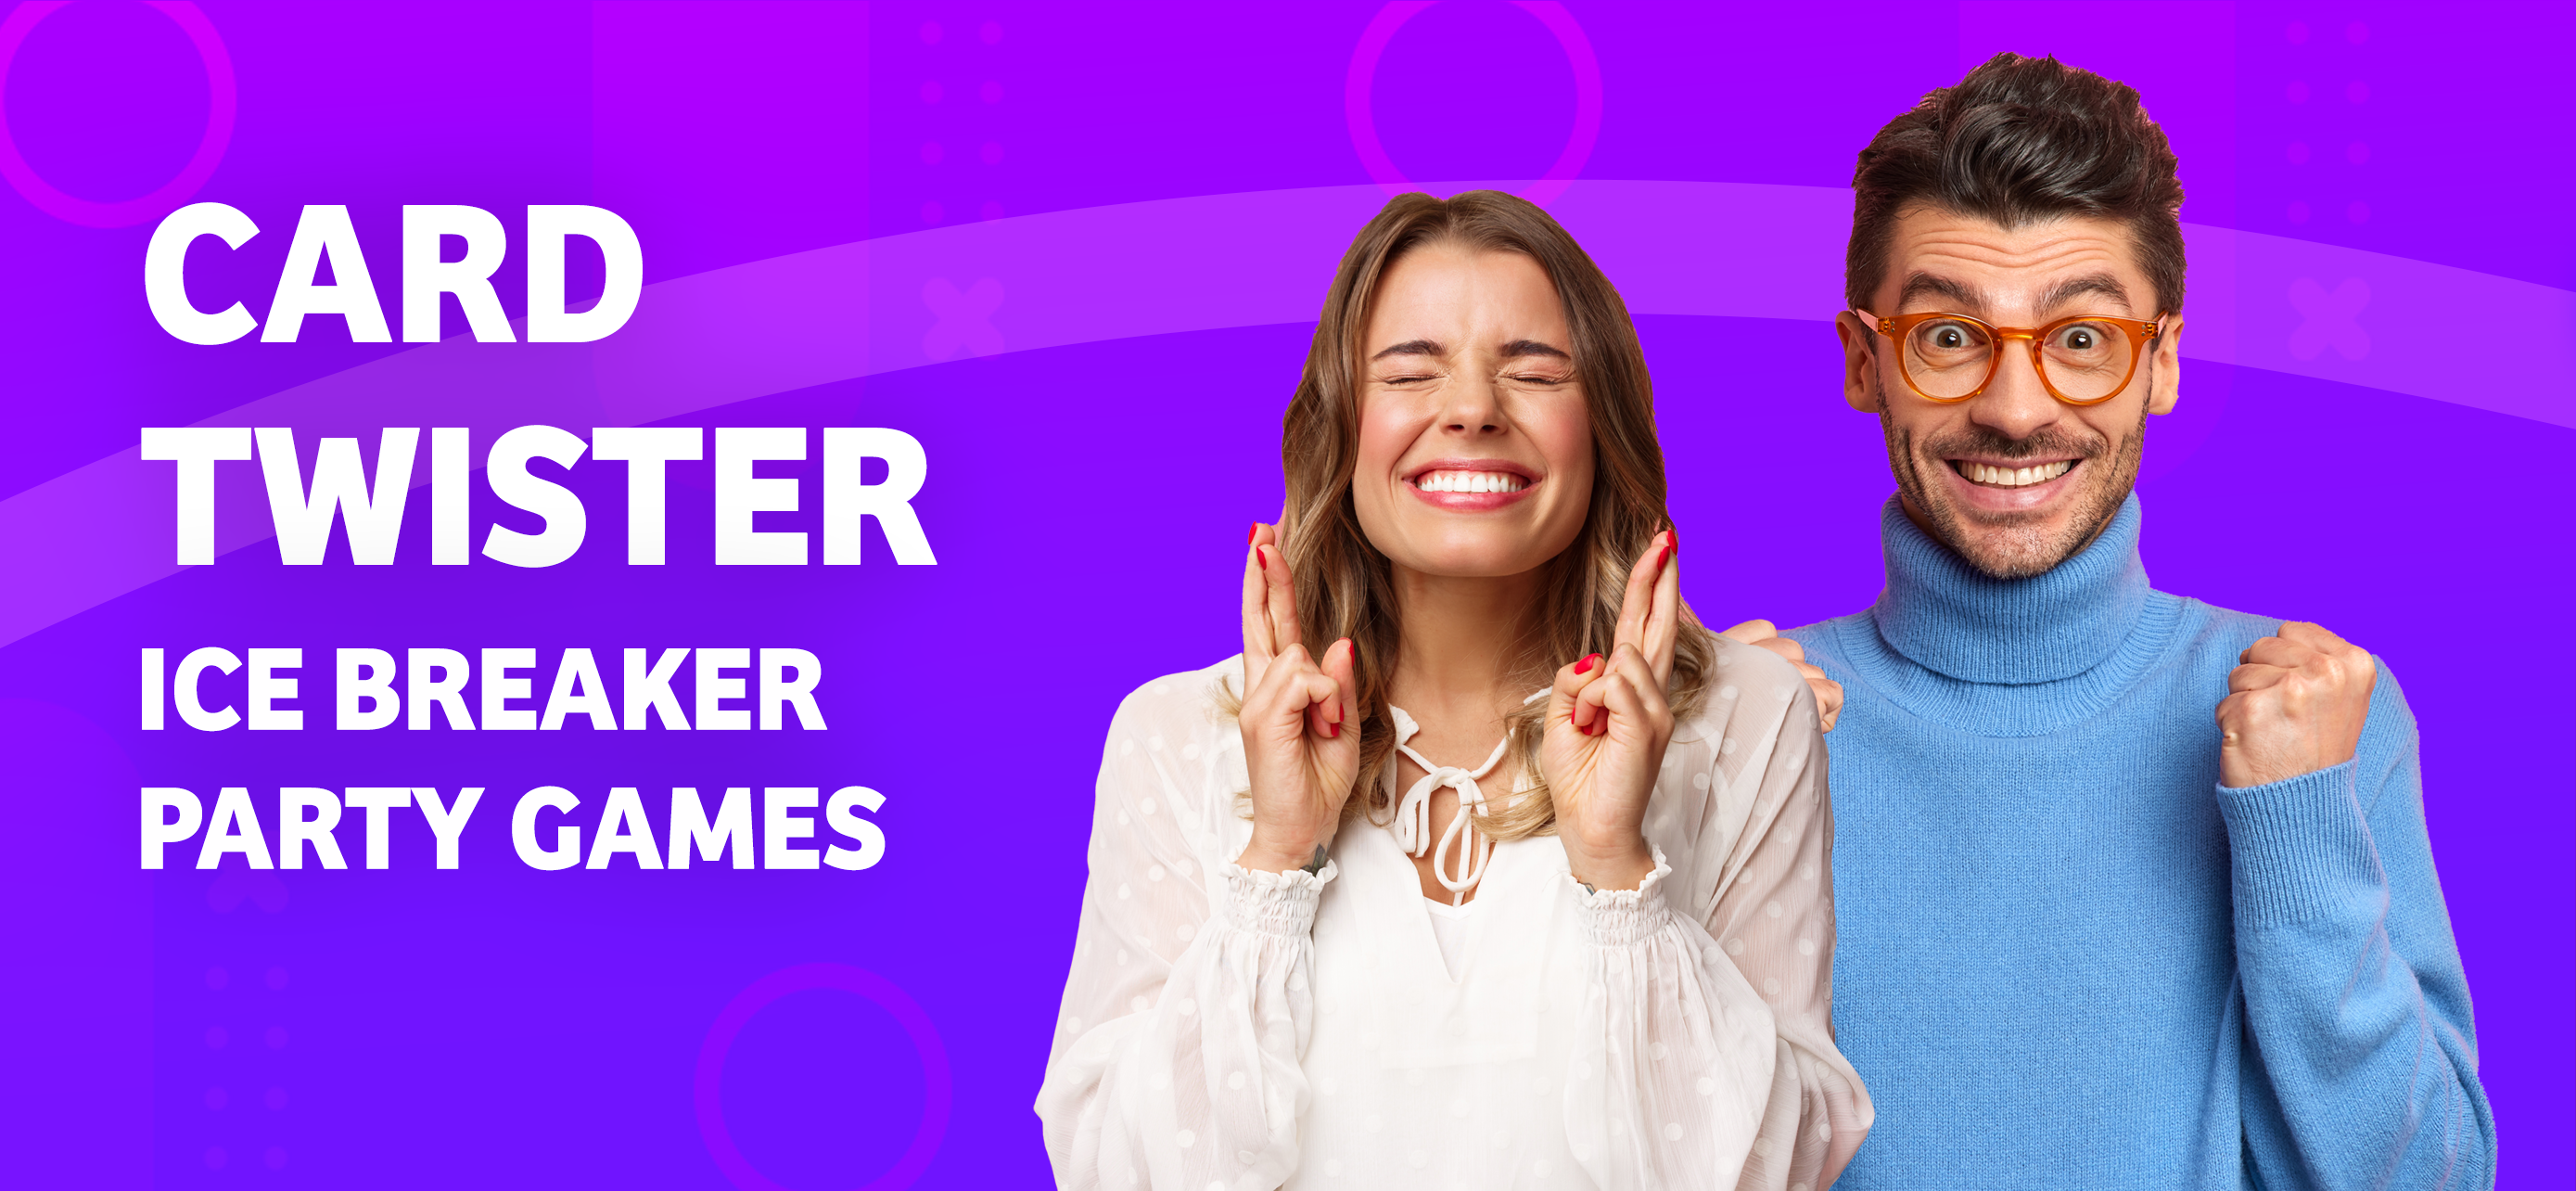 $50 and One Month’s Access to Card Twister’s Expansion Sets! Giveaway